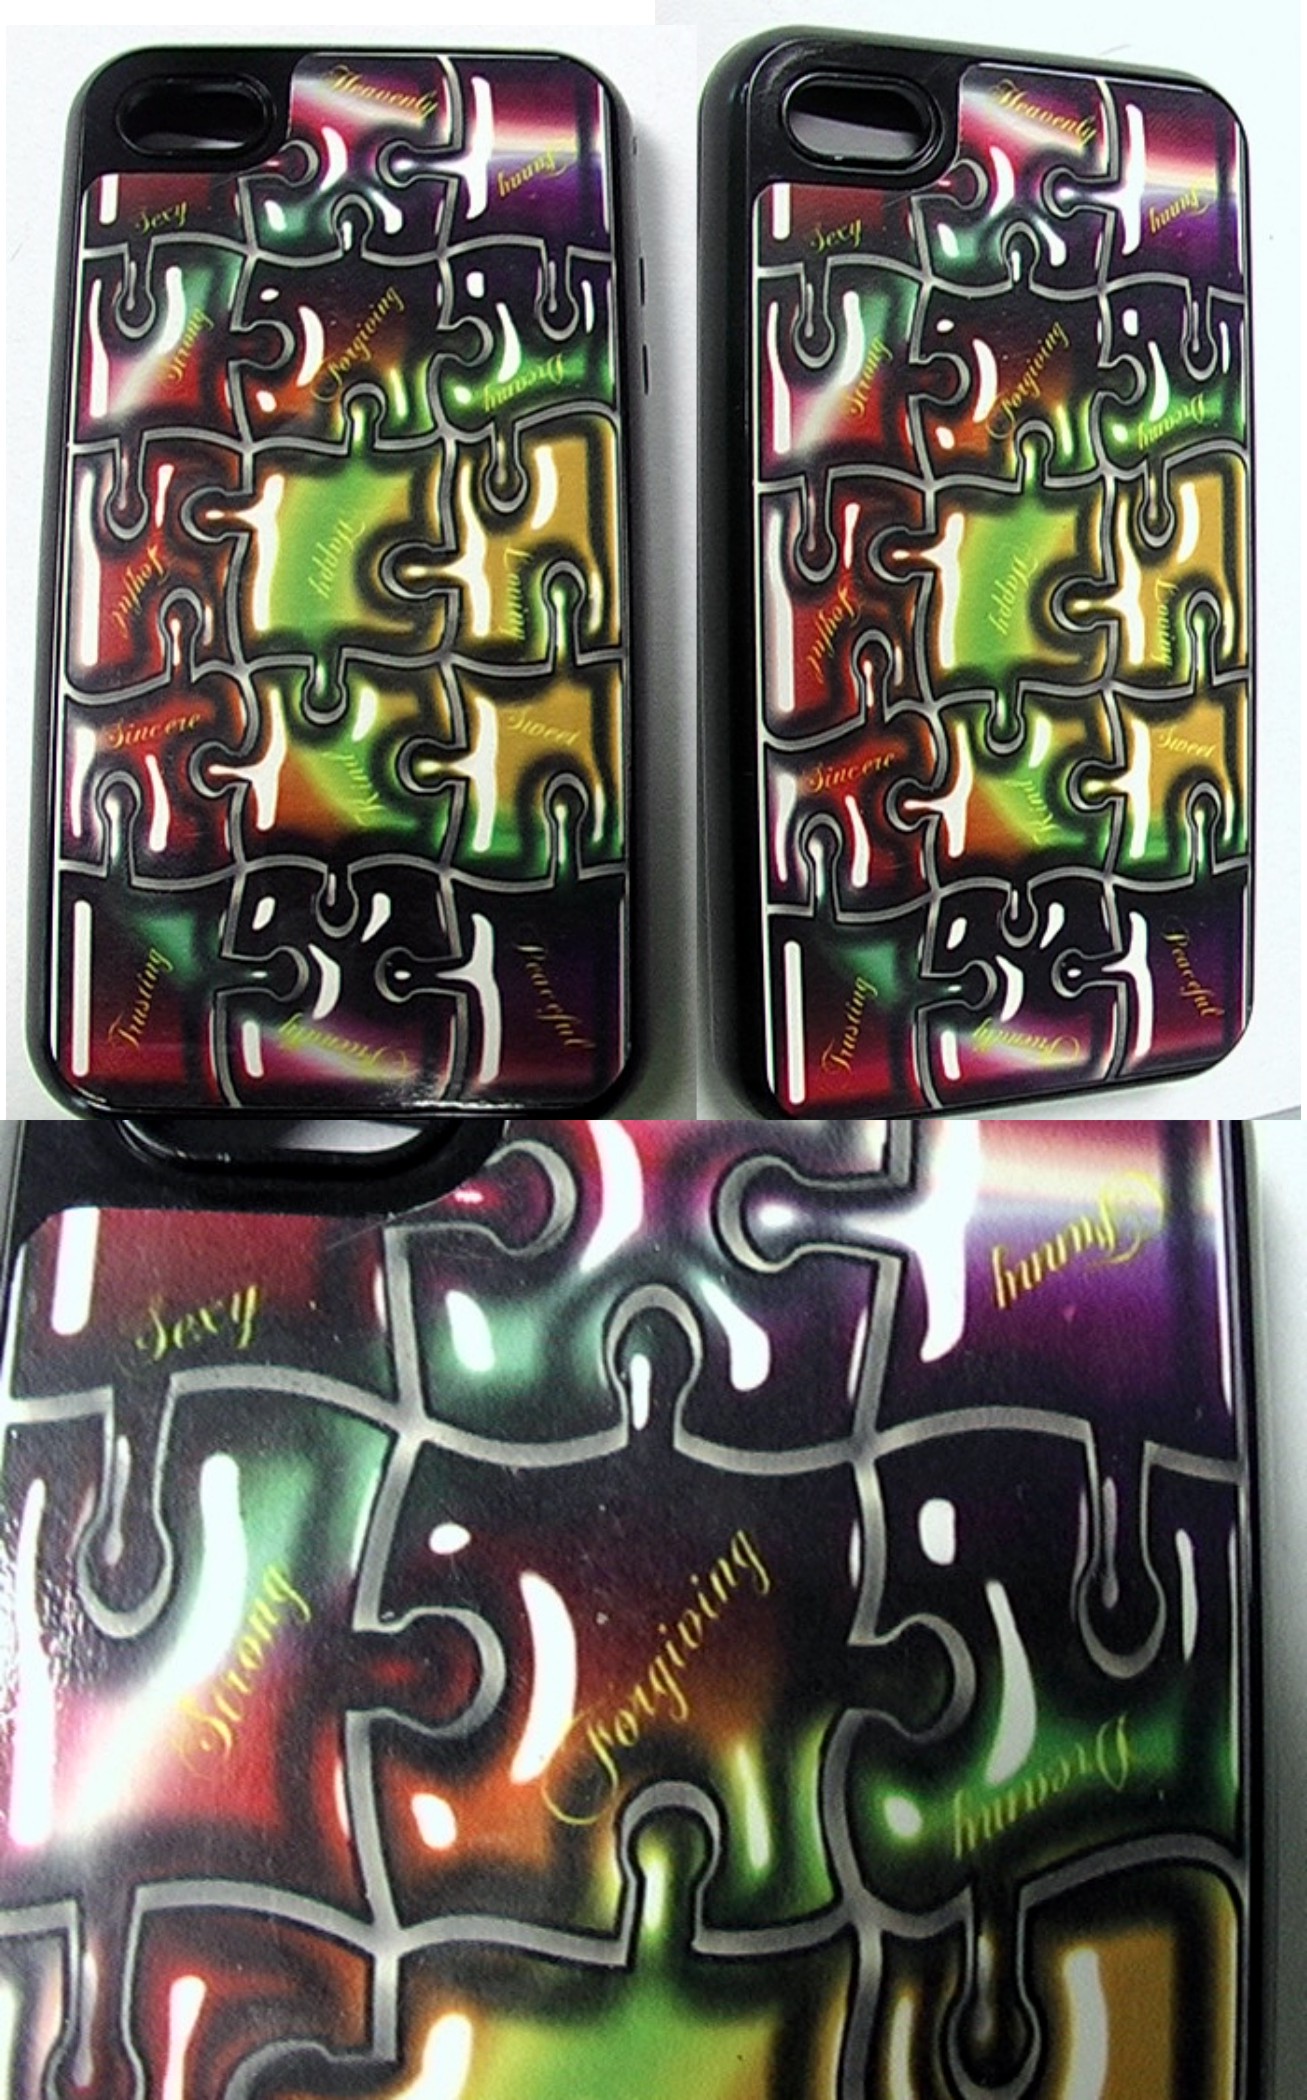 Puzzle Theme - Hard Candy made with sublimation printing